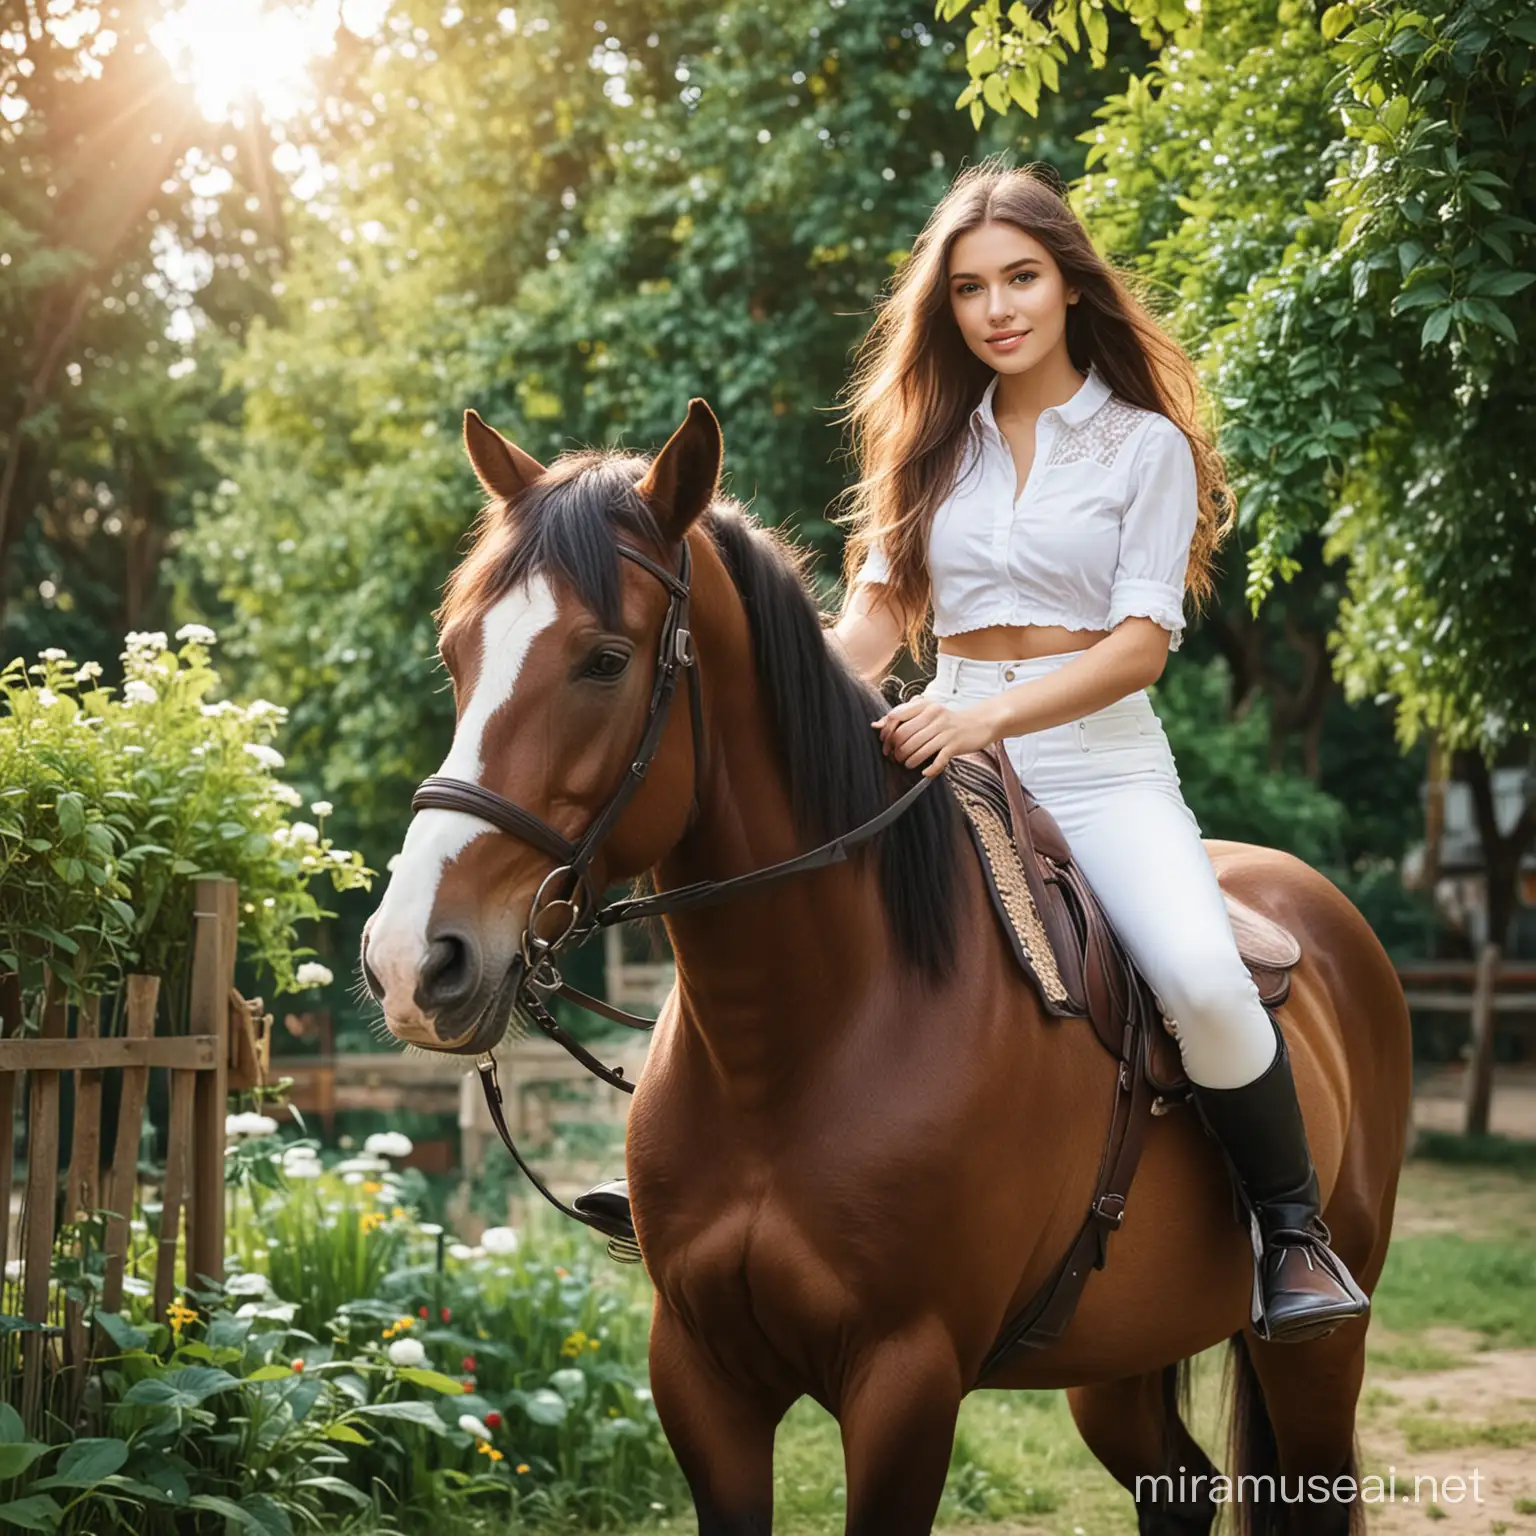 Elegant Young Lady Riding Horse in a BlossomFilled Garden